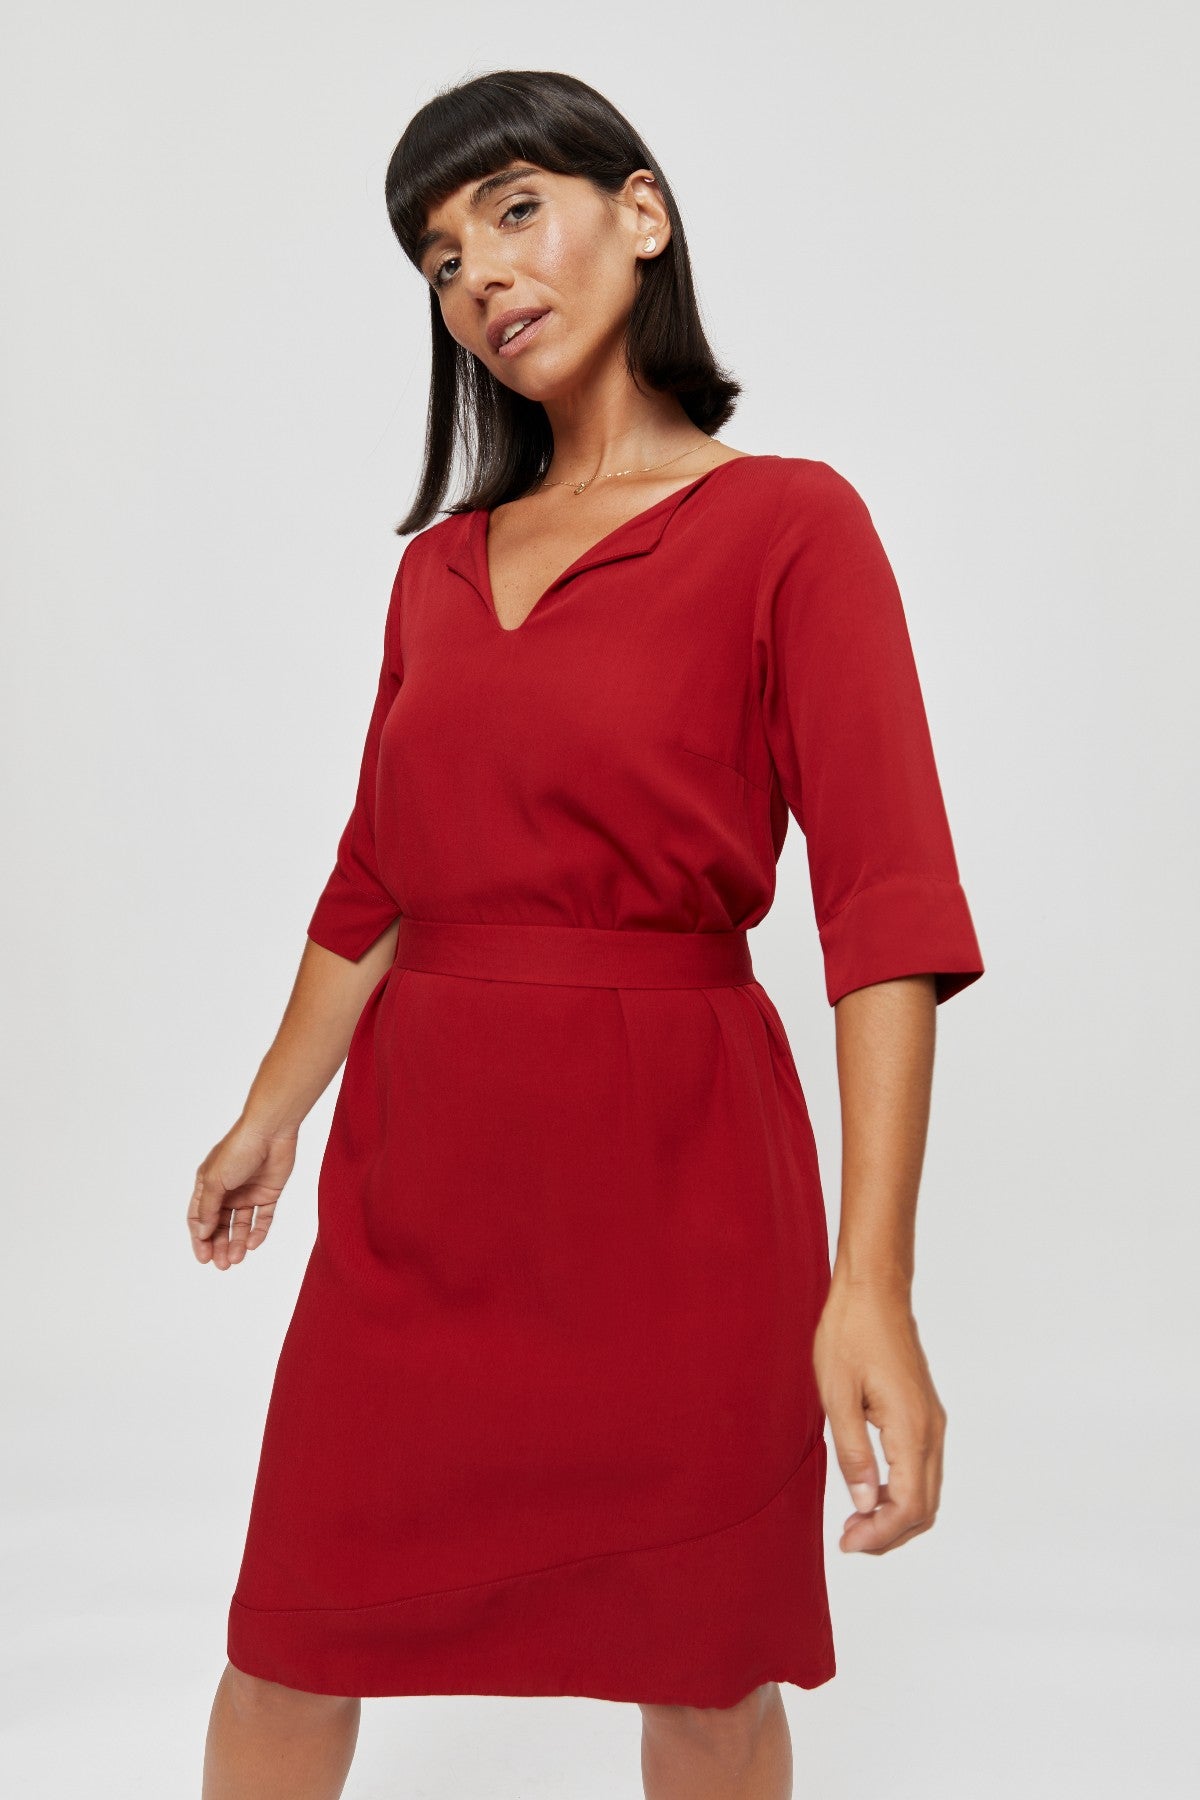 Red dress Catherine made of 100% viscose by Ayani